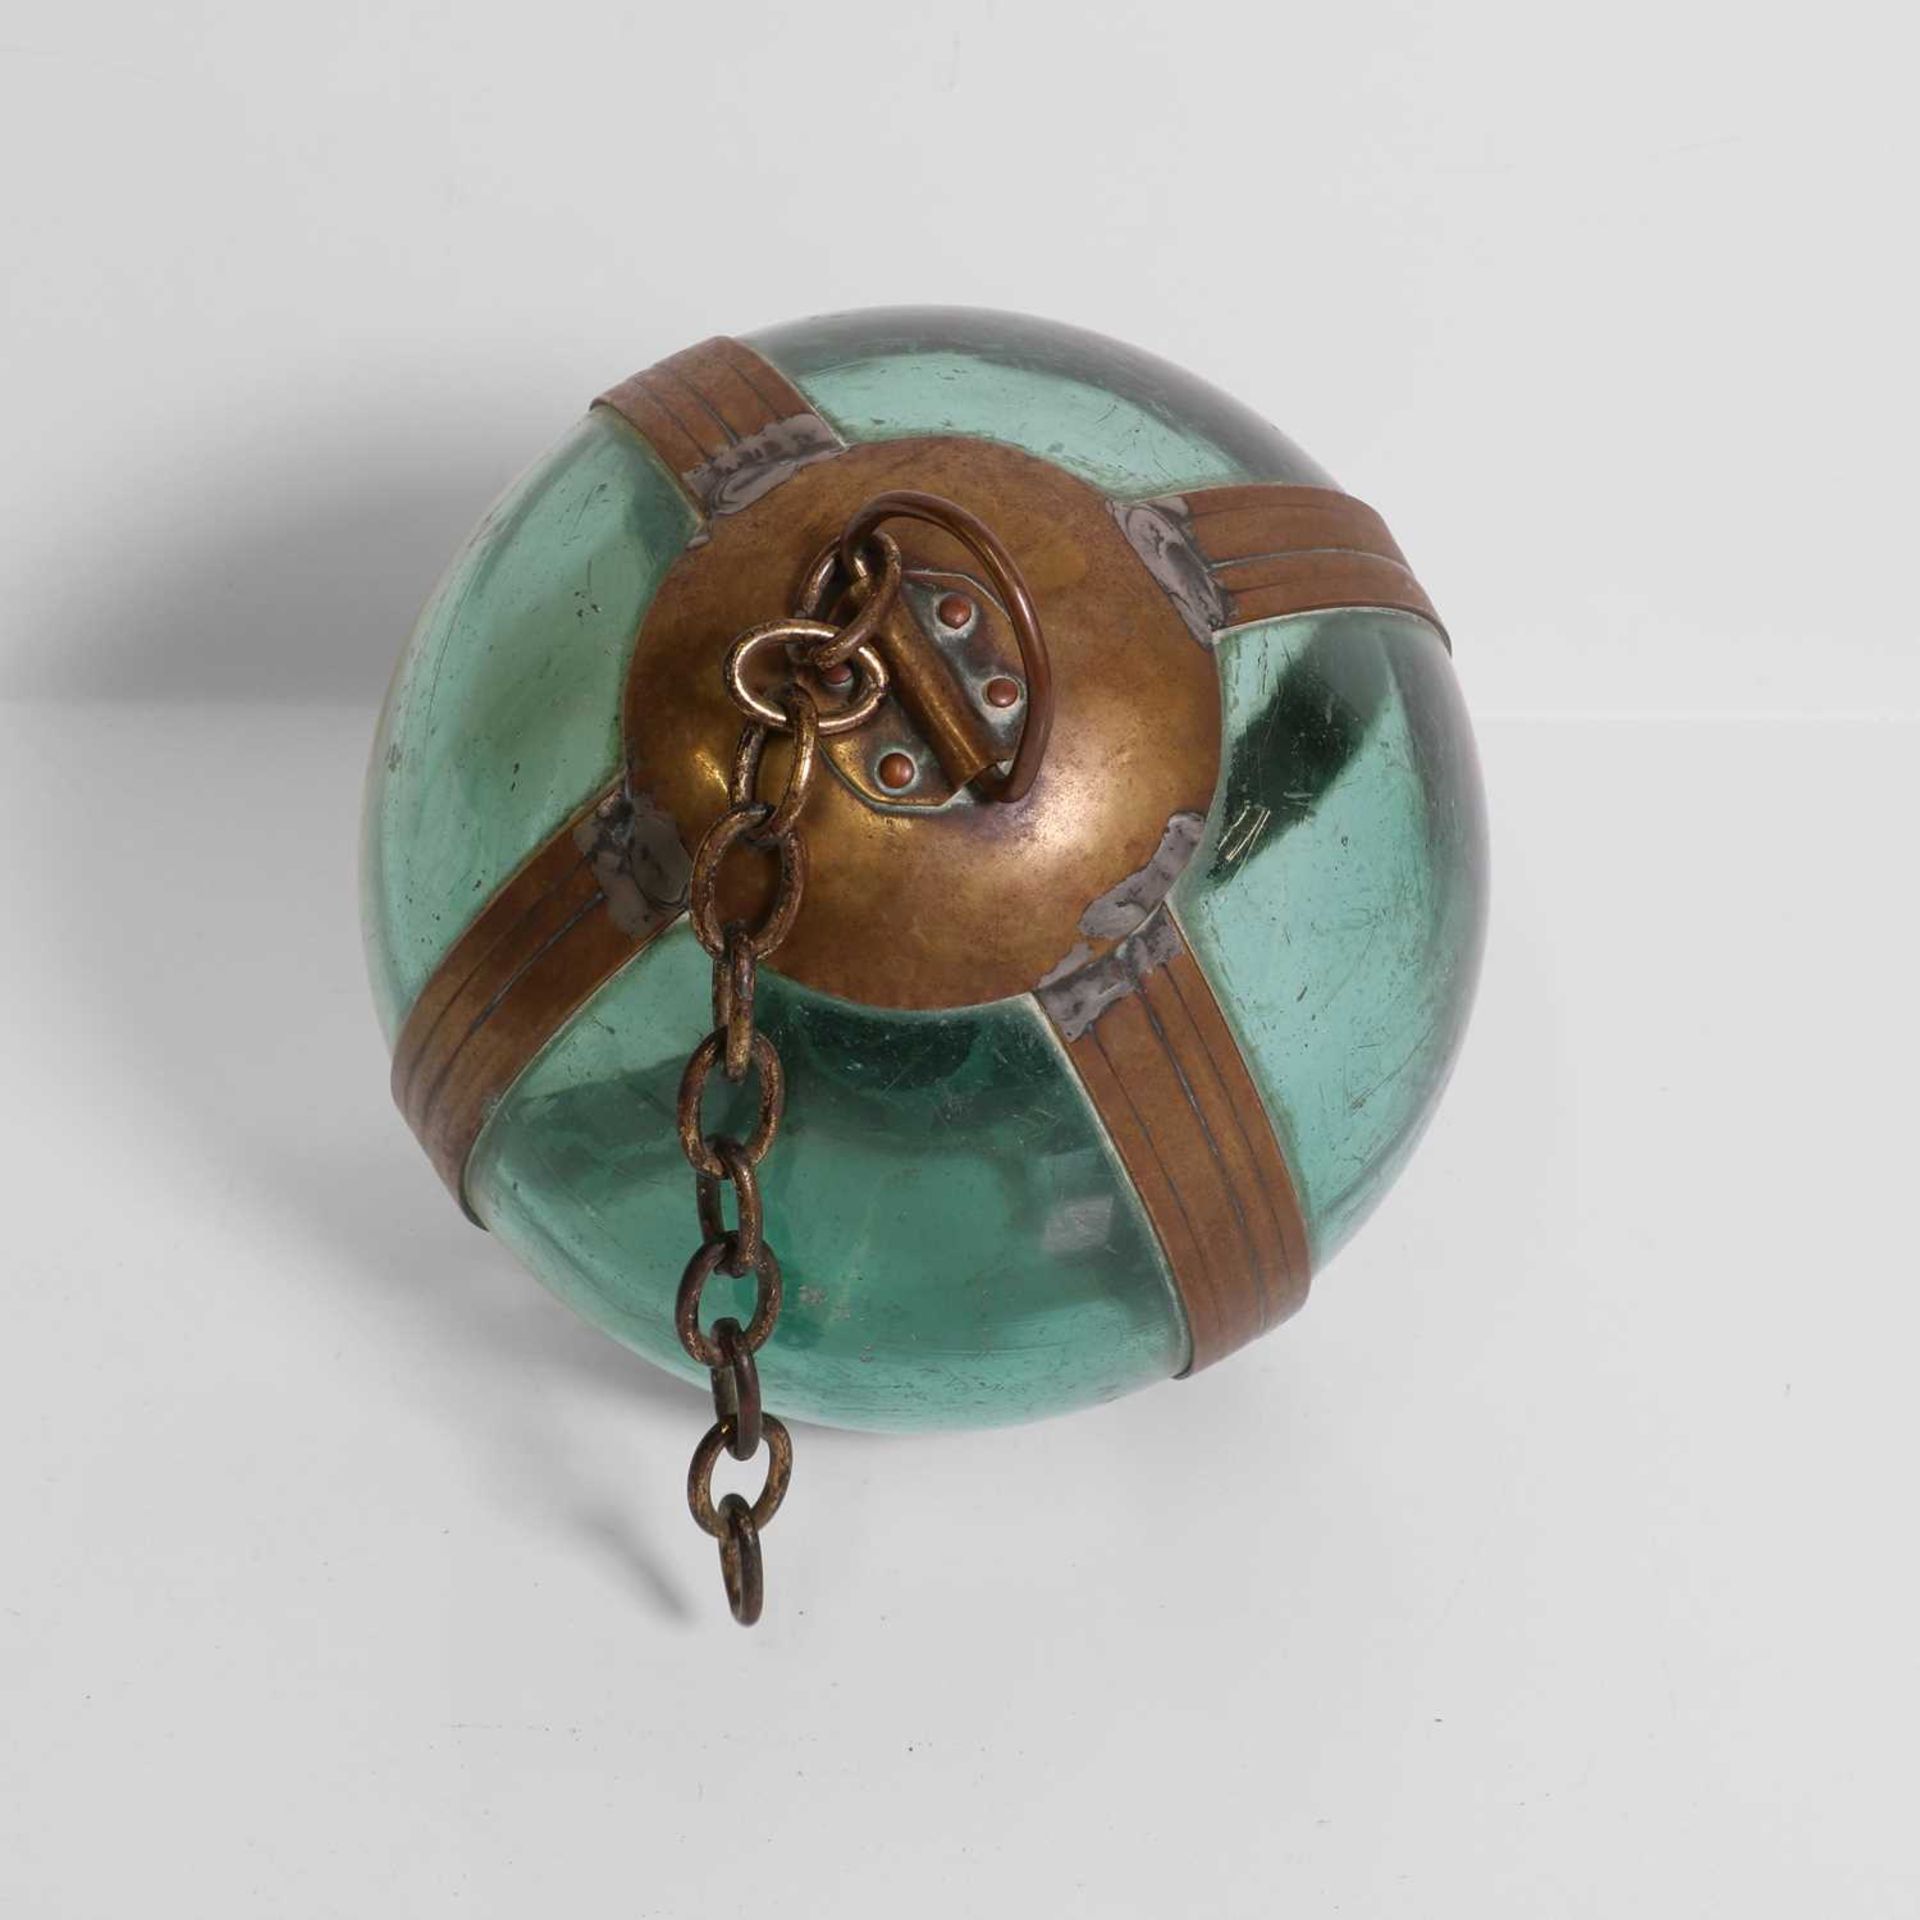 A brass-mounted pale-green glass buoy or fishing float, - Image 6 of 7